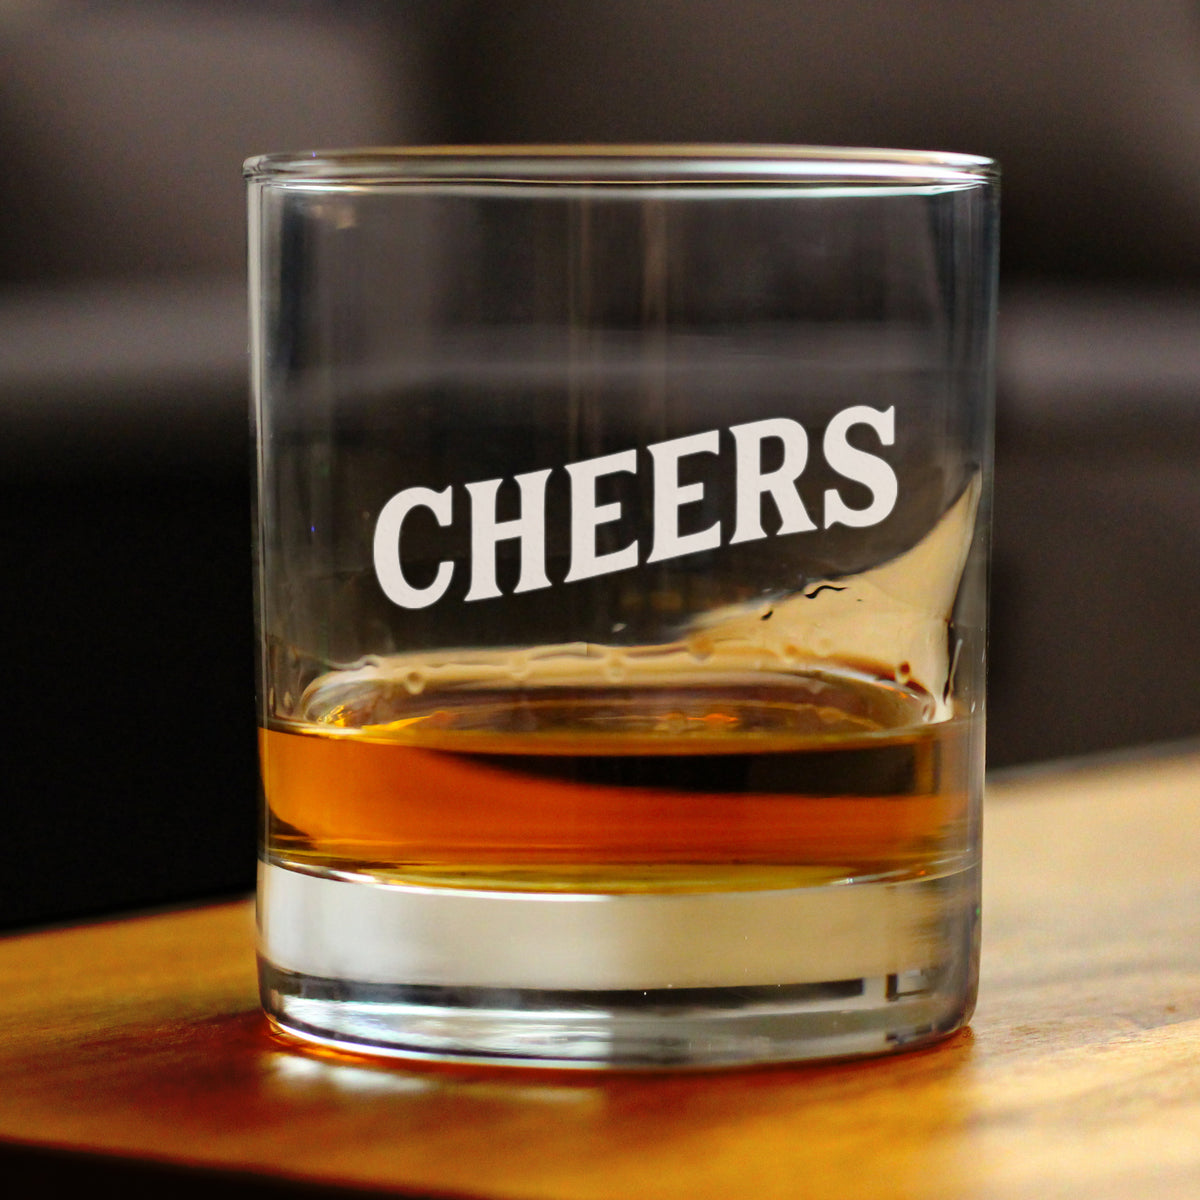 Cheers - Whiskey Rocks Glass - Cute Themed Gifts or Party Decor for Women and Men - 10.25 Oz